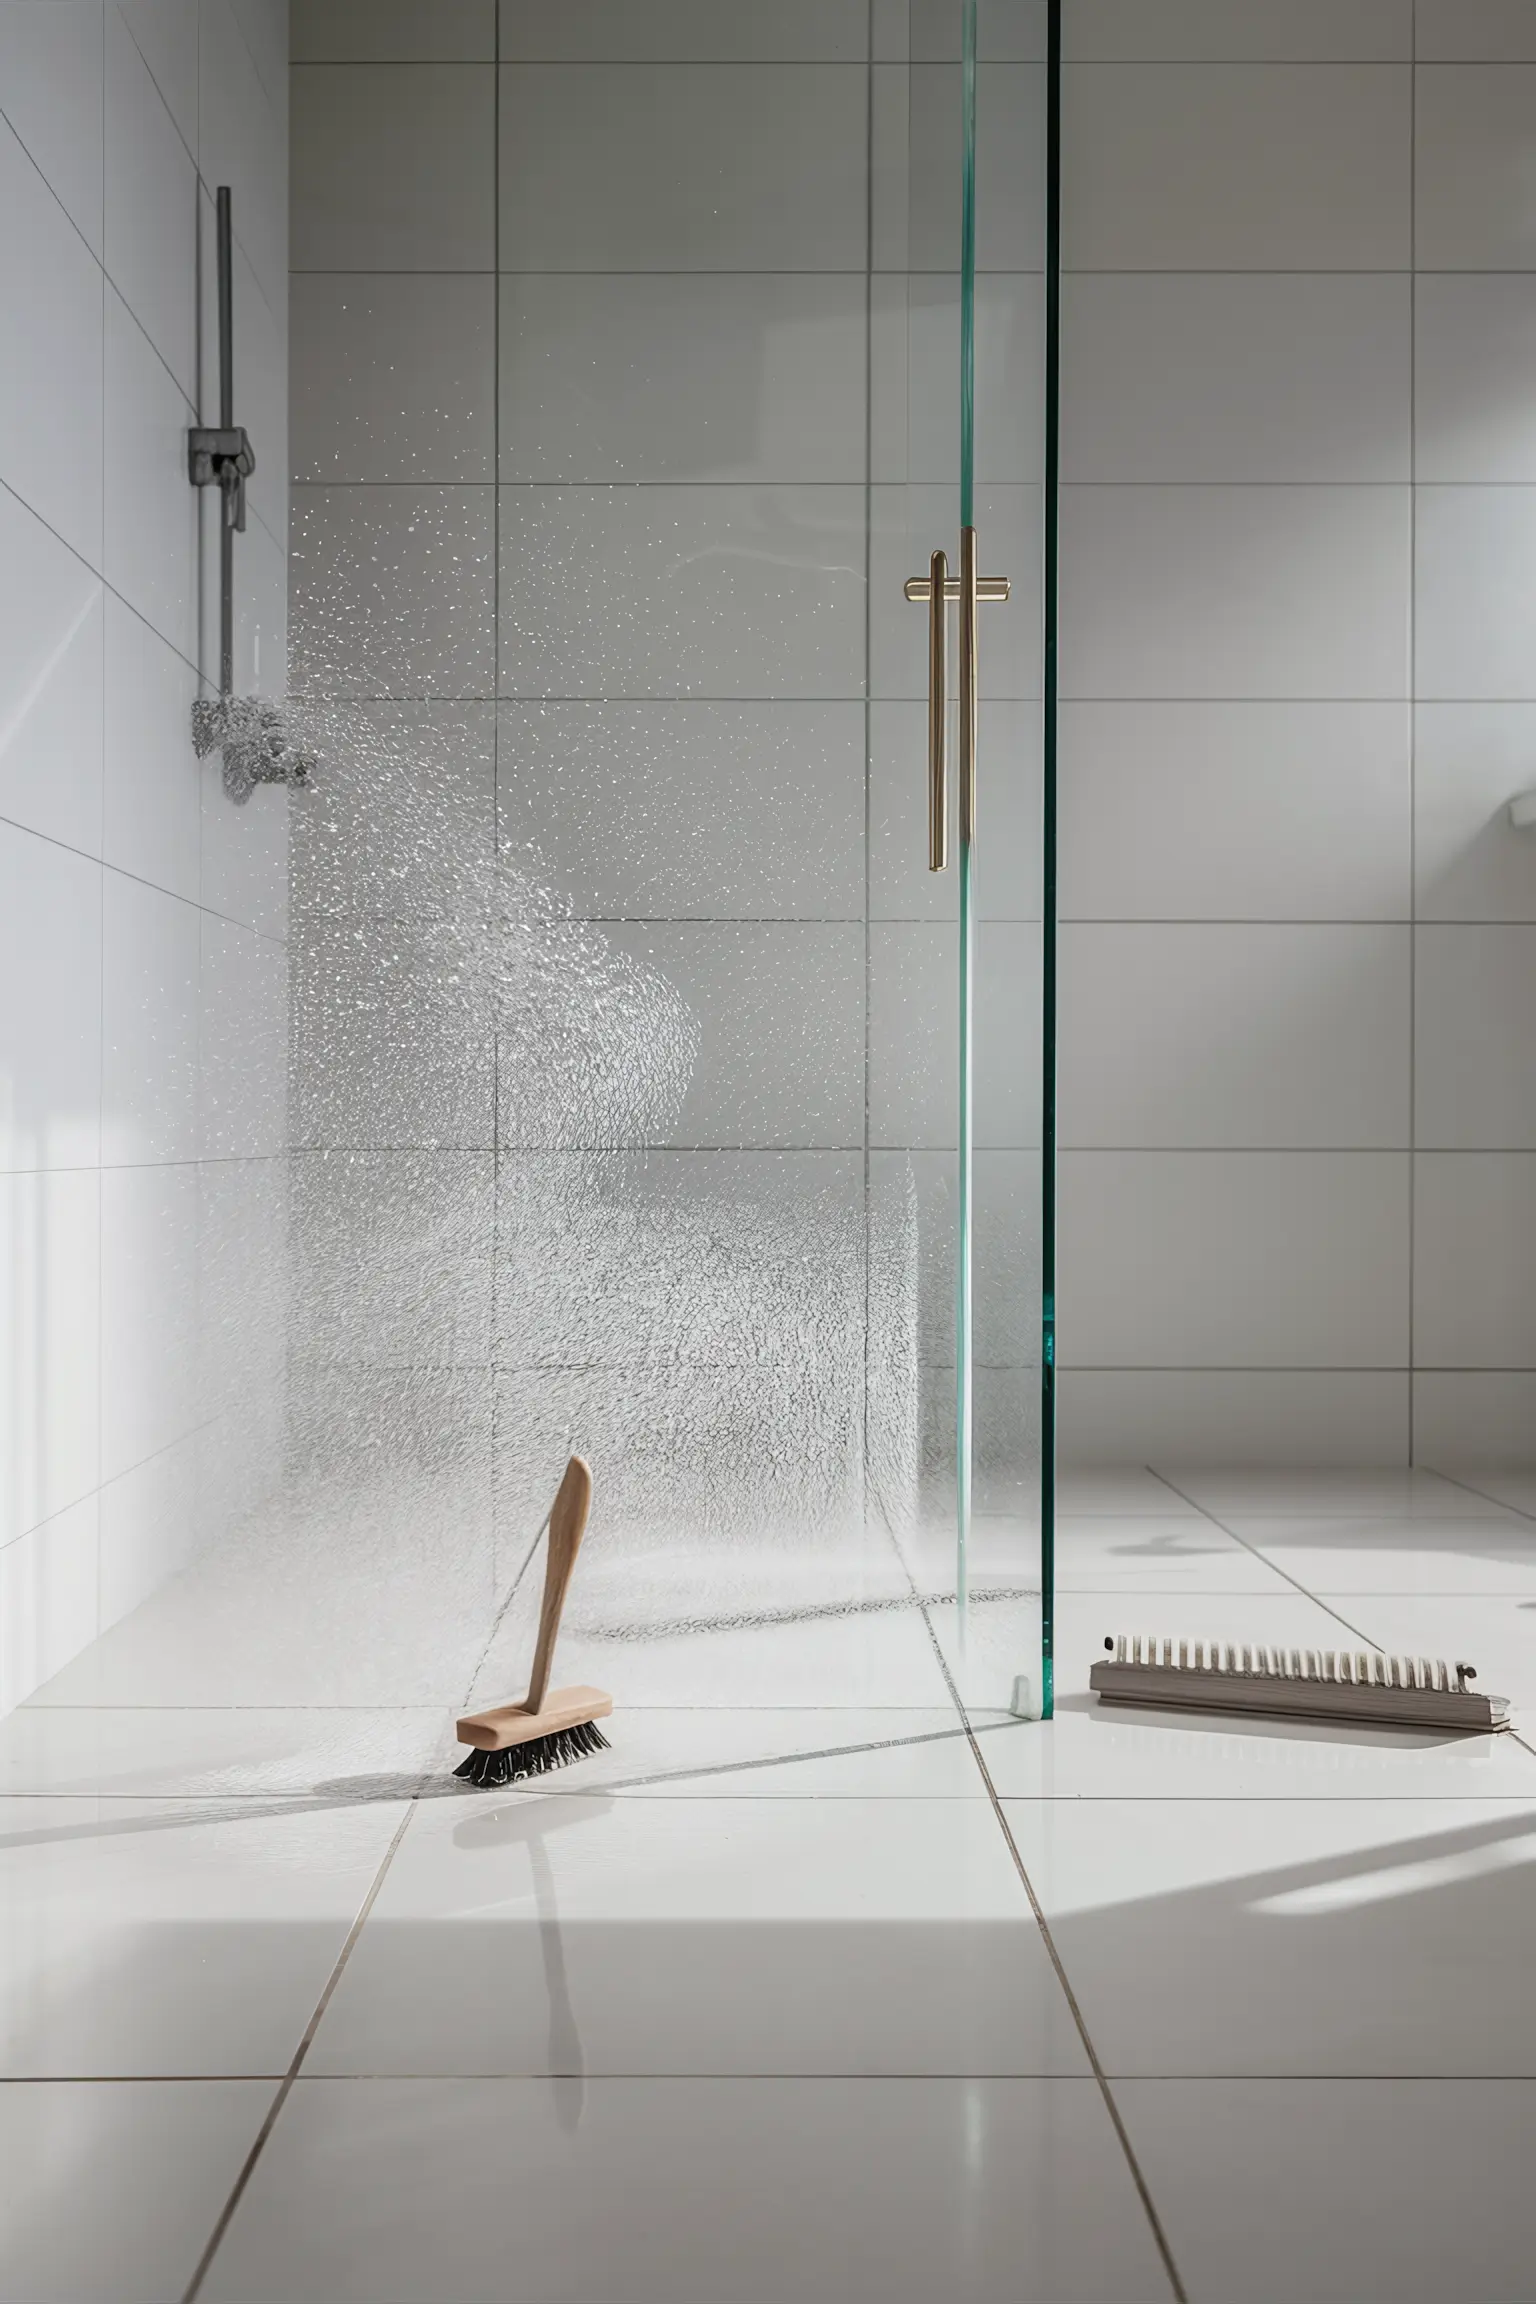 Minimalistic shower with sparkling clean tiles.